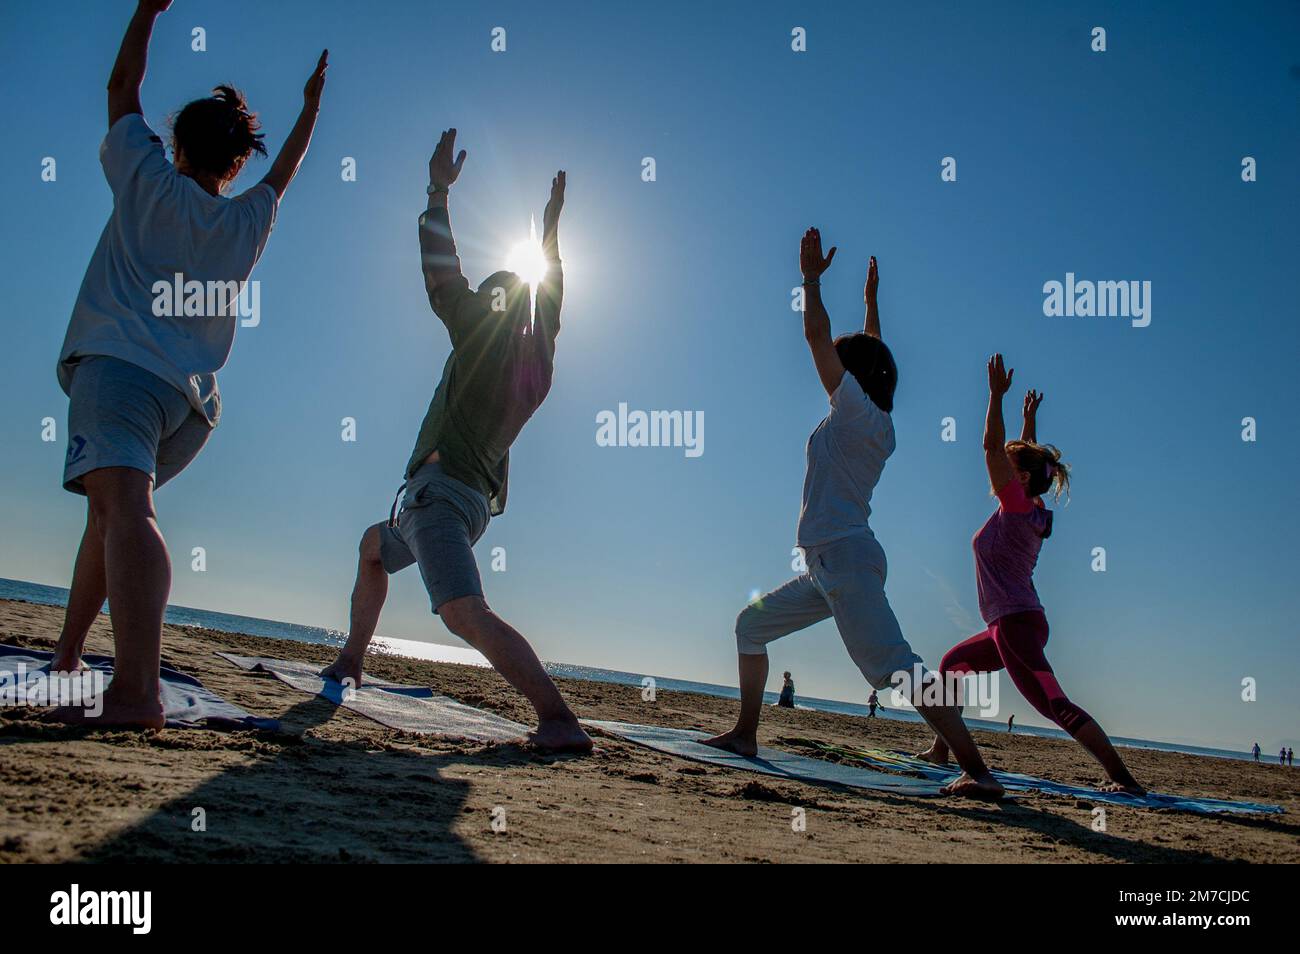 Rimini Italy August 7 2016: Group of people doing gymnastics at sunrise on the beach Stock Photo